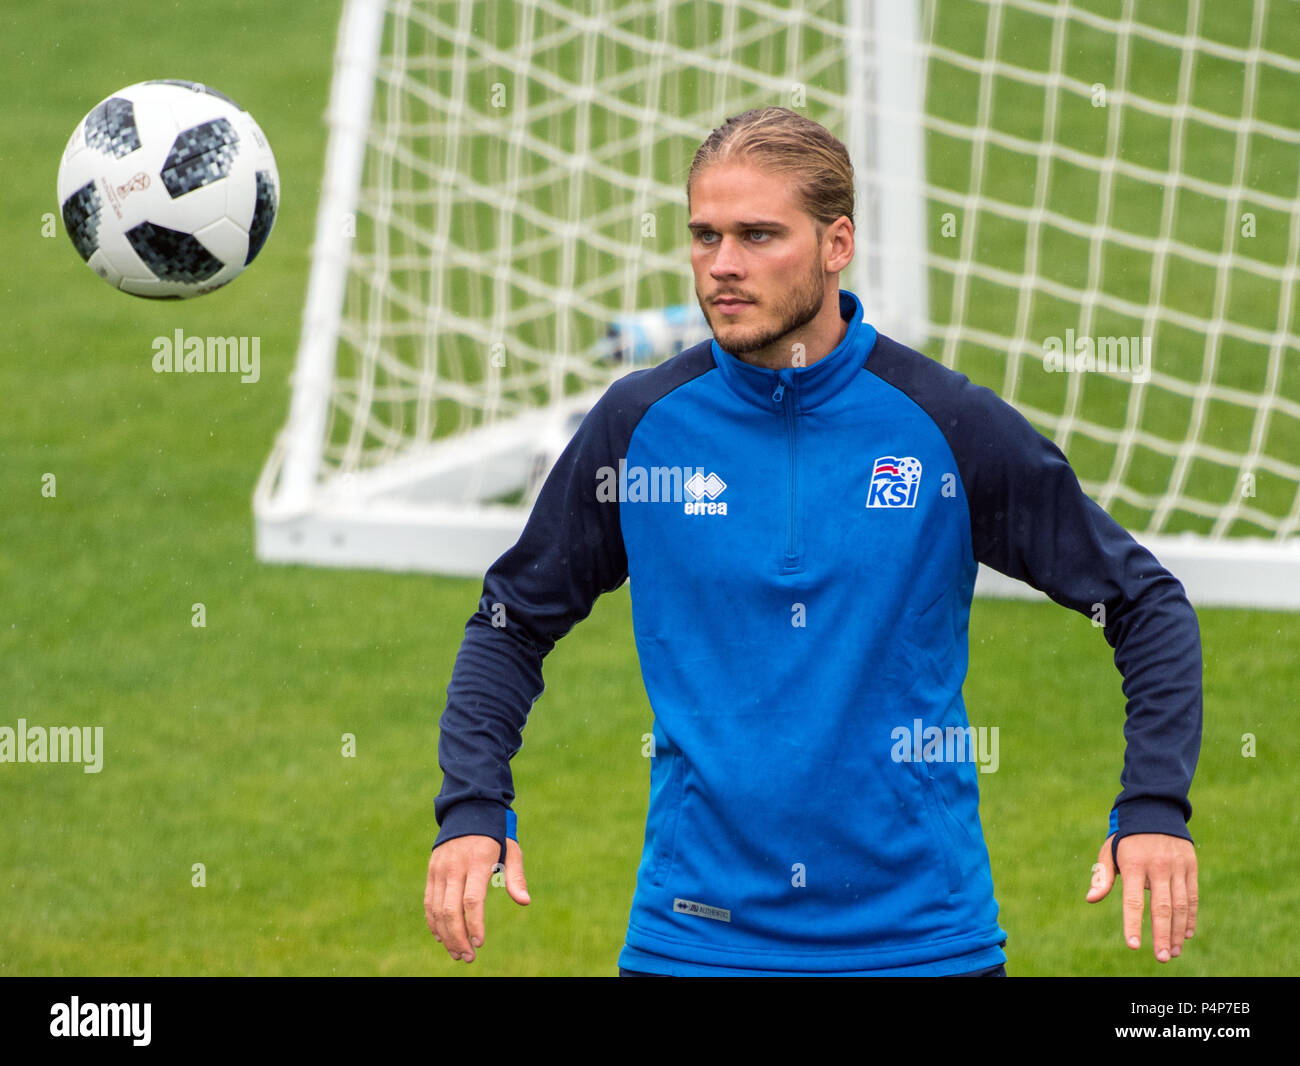 Gelendzhik, Russia. 23rd June, 2018. Soccer, FIFA World Cup, training, Iceland: Rurik Gislason in action. On Tuesday (26 June), Iceland faces Croatia in the last group stages match of the World Cup. Credit: Maximilian Haupt/dpa/Alamy Live News Stock Photo